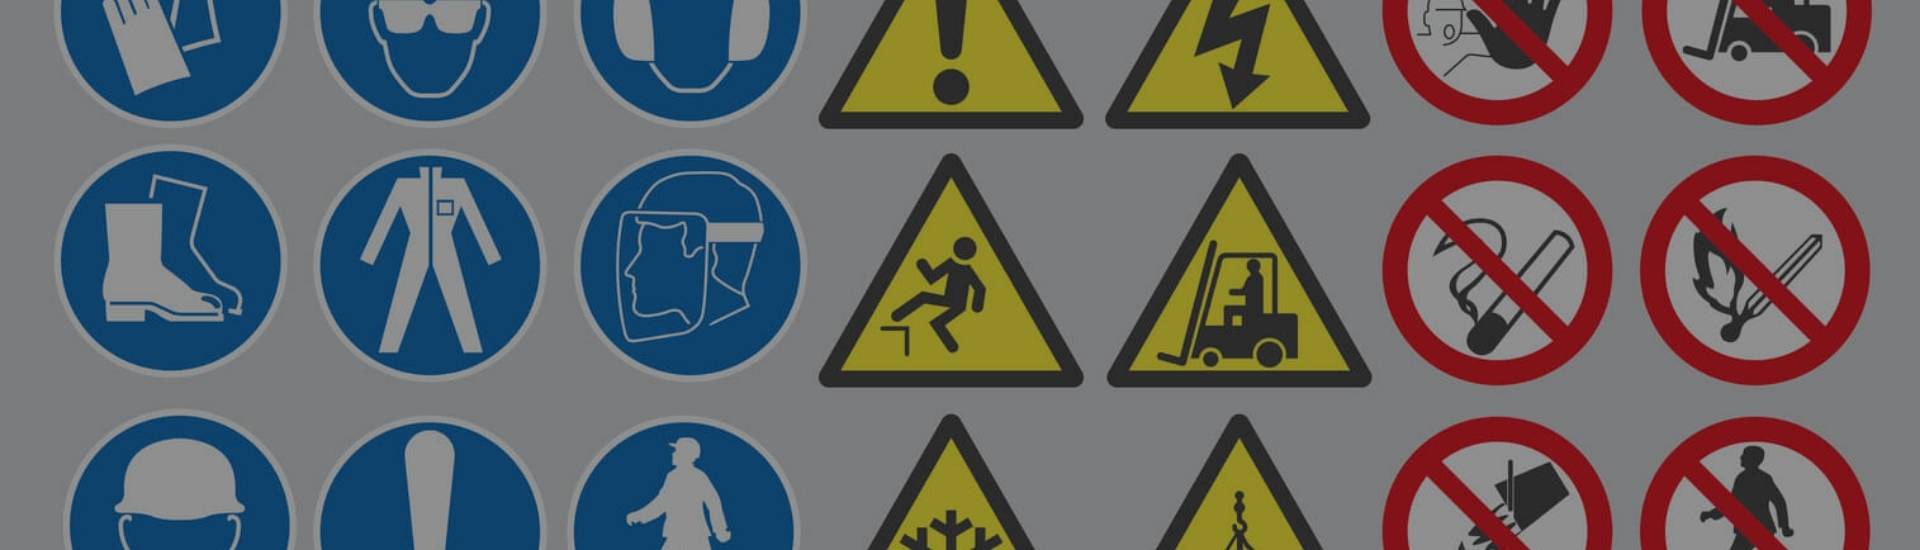 Custom Safety Signs for Your Business